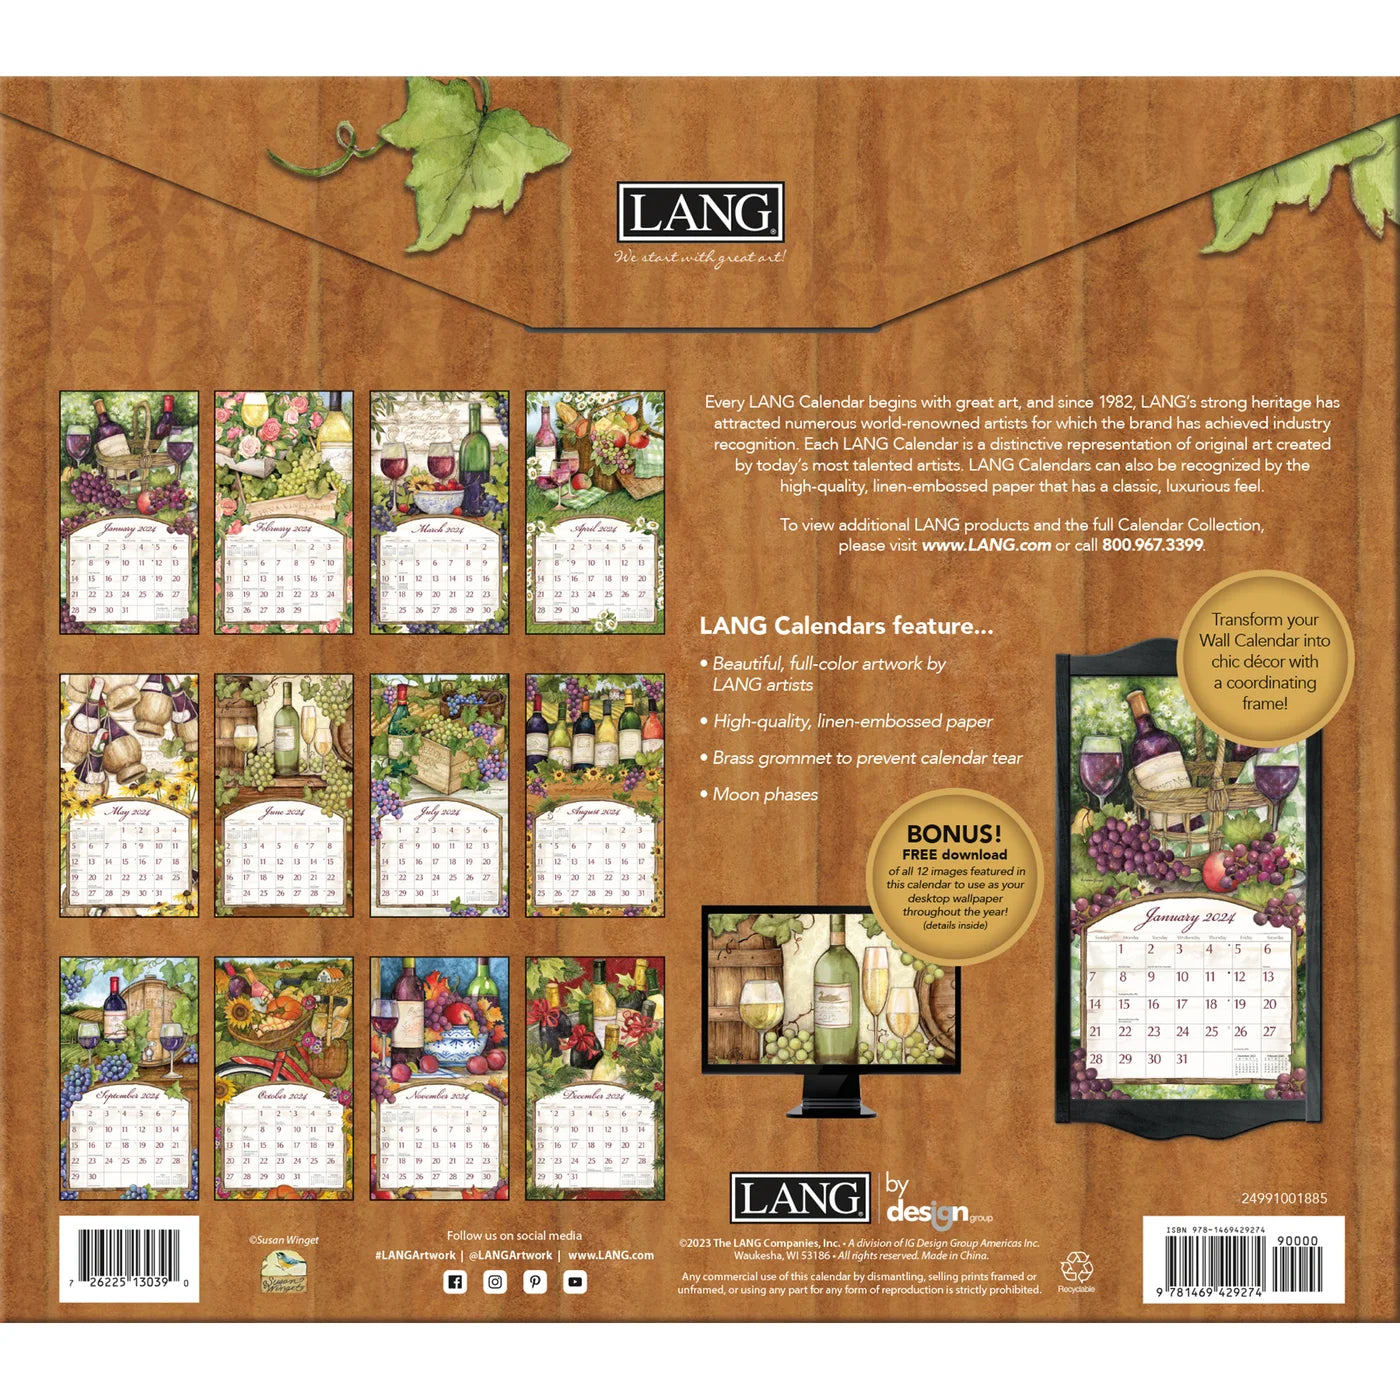 2024 LANG Wine Country By Susan Winget - Deluxe Wall Calendar